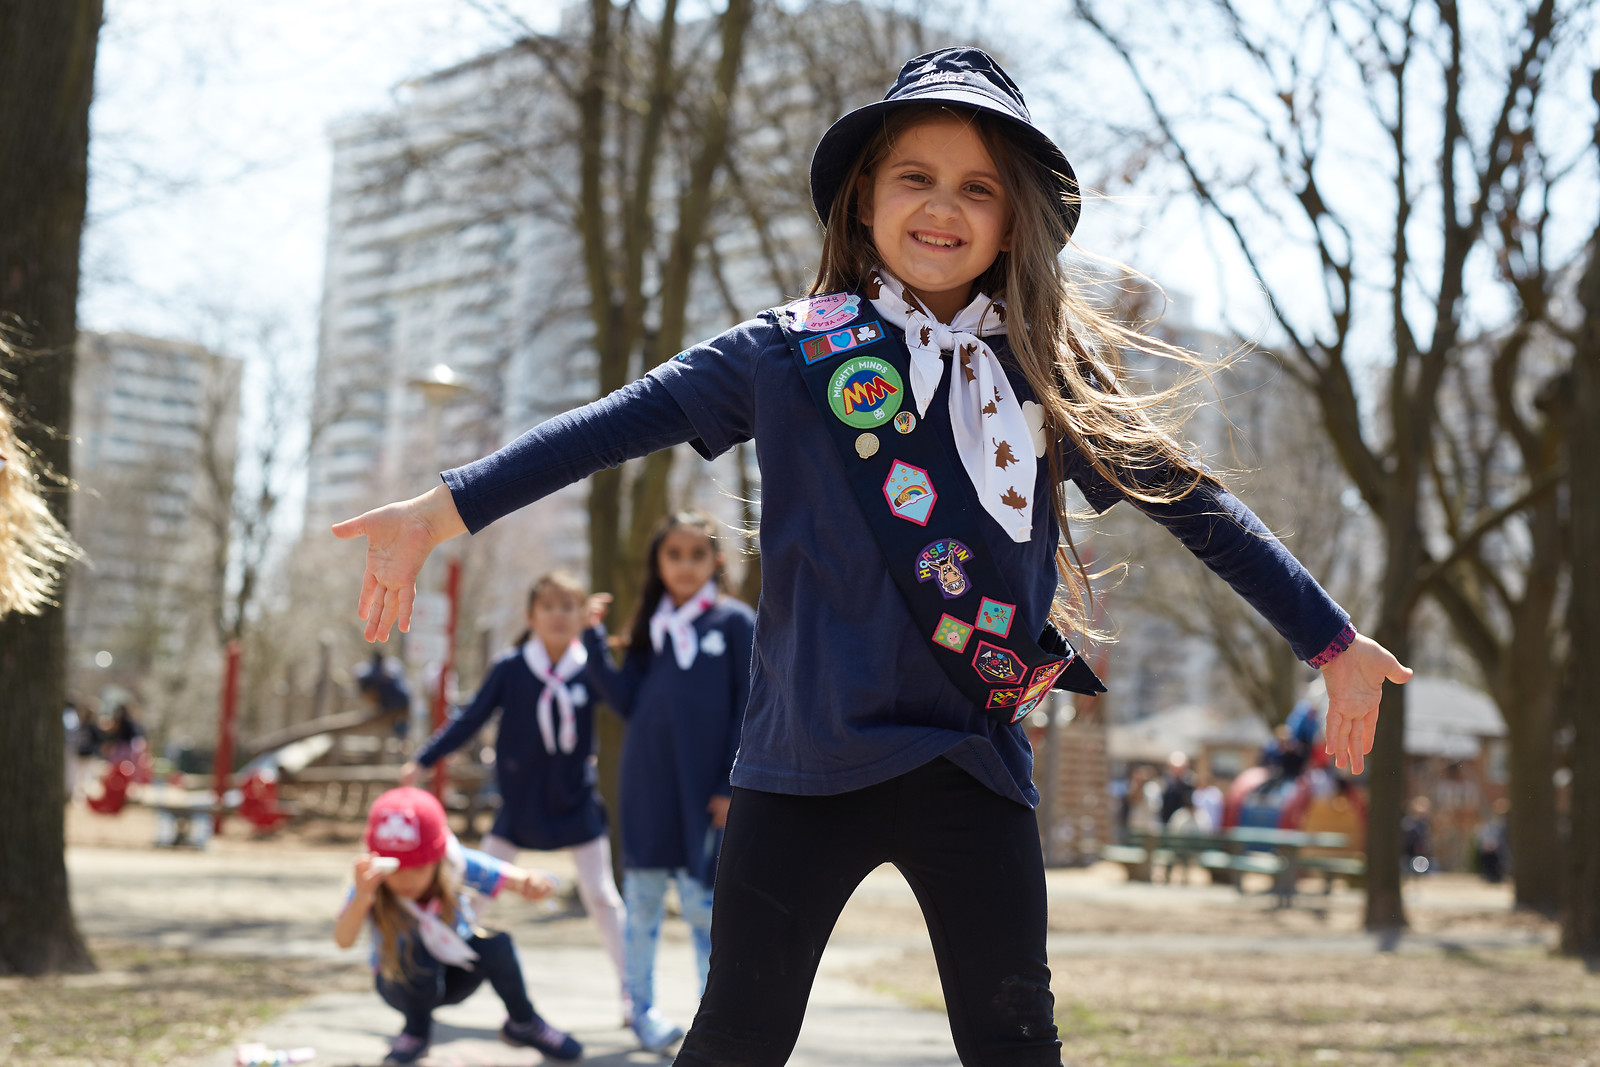 A Girl Guide aged 7 to 8 smiling and posing with arms outsretched. She is outside at a park with friends playing behind her